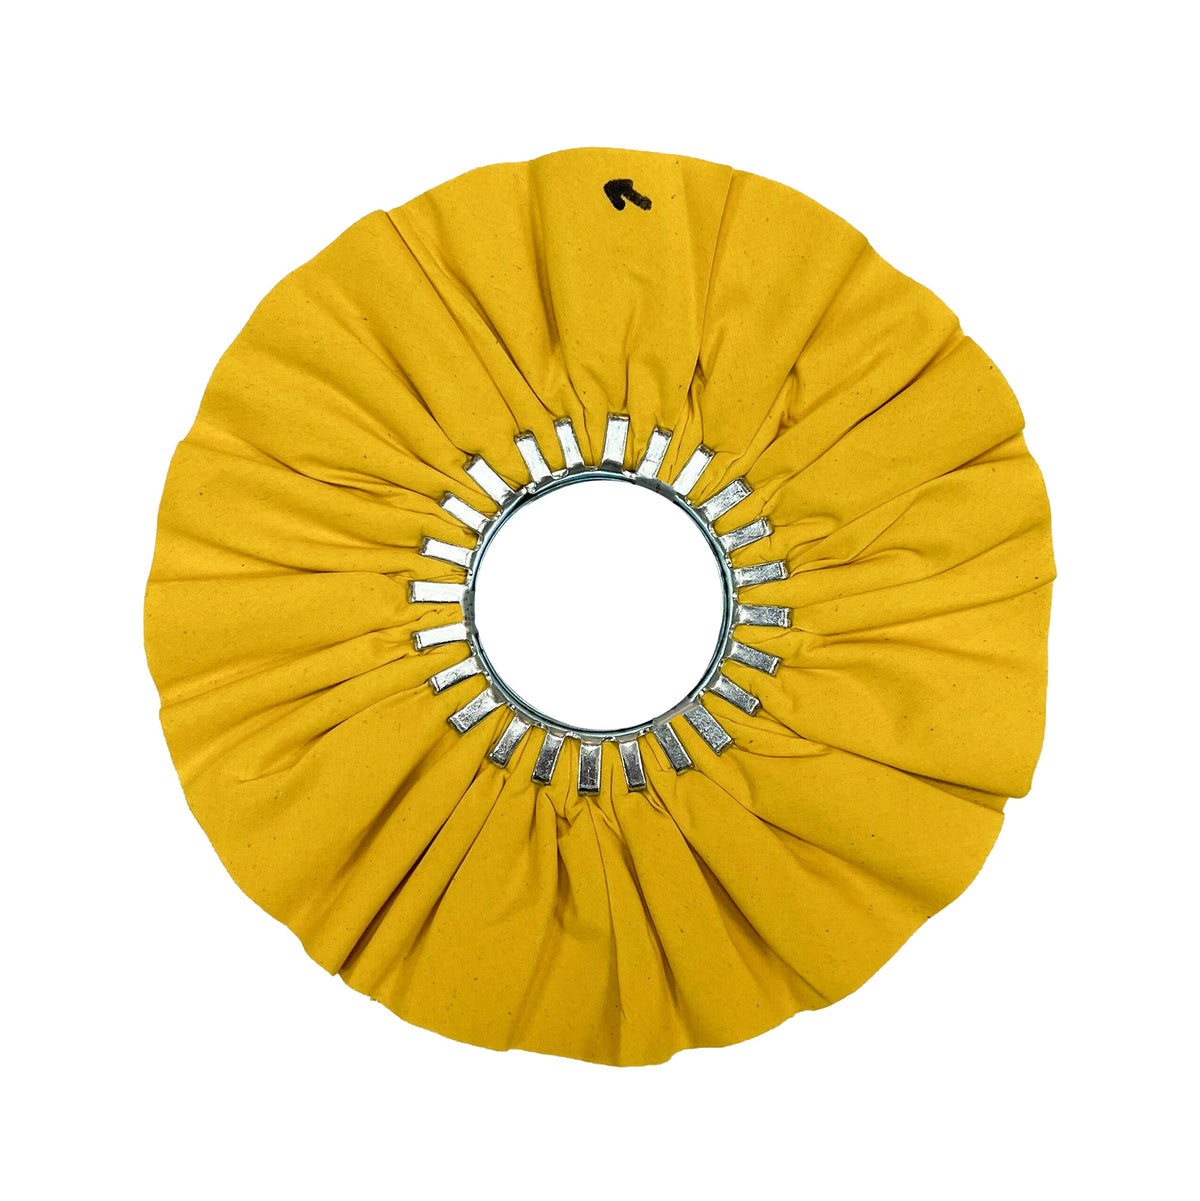 Renegade Products USA Yellow Airway Buffing Wheel - High-Quality Buffing Tool for Efficient Polishing and Finishing Tasks